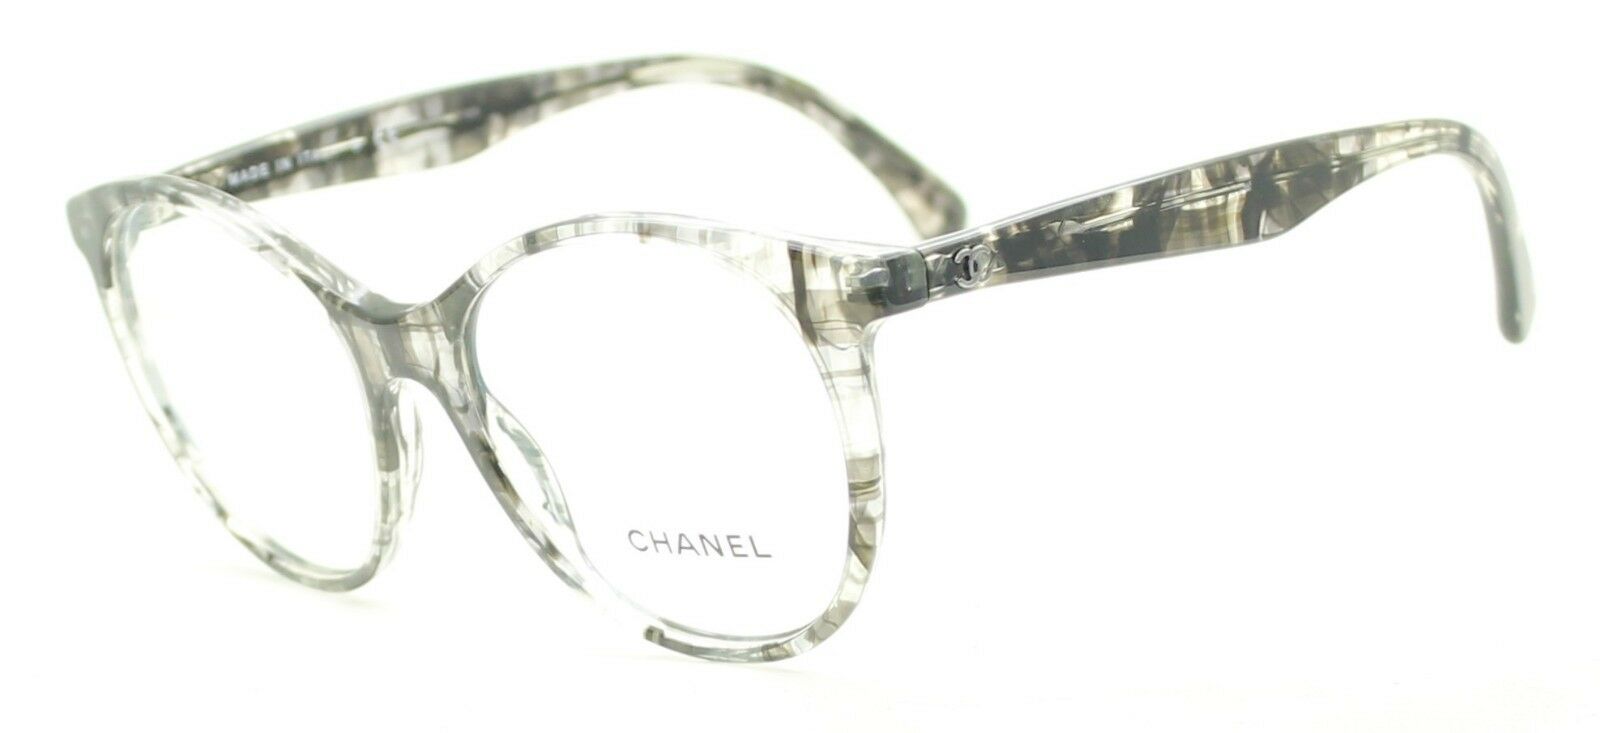 chanel spectacles price